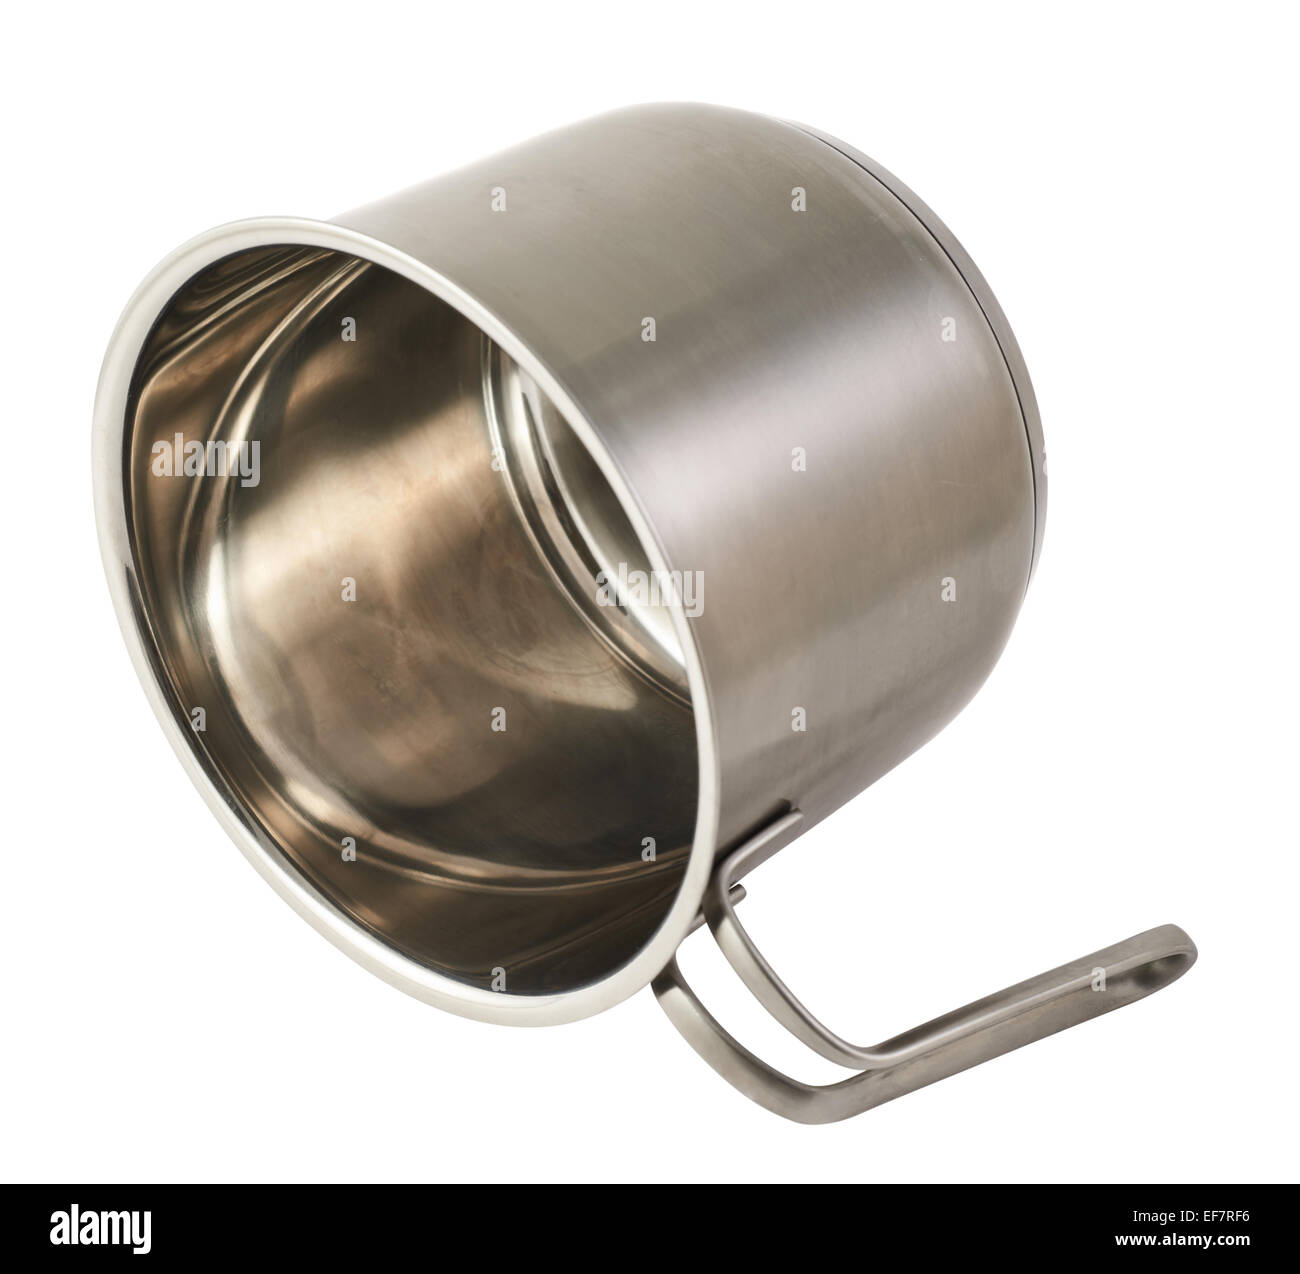 https://c8.alamy.com/comp/EF7RF6/stainless-steel-cooking-pot-isolated-EF7RF6.jpg